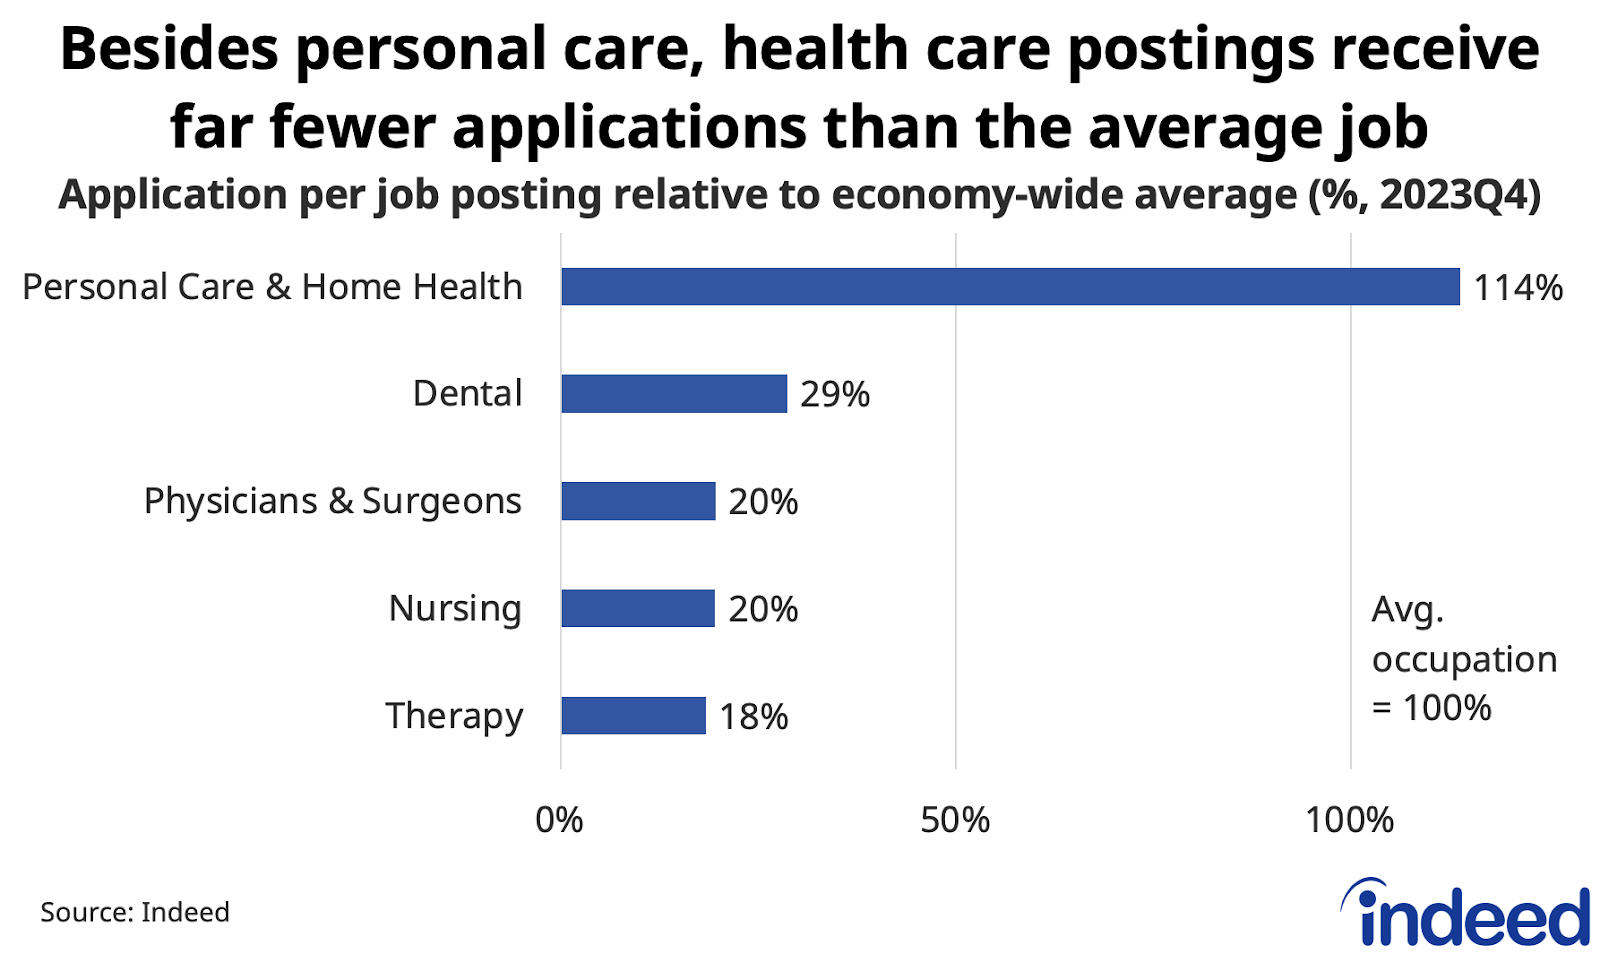 Row bar graph titled “Besides personal care, health care postings receive far fewer applications than the average job,” showing the ratio of applications per posting for different health care occupations relative to the economy-wide average in 2023Q4. Job postings for nurses, therapists, and doctors received just 20% of the applications as the typical Canadian job ad.